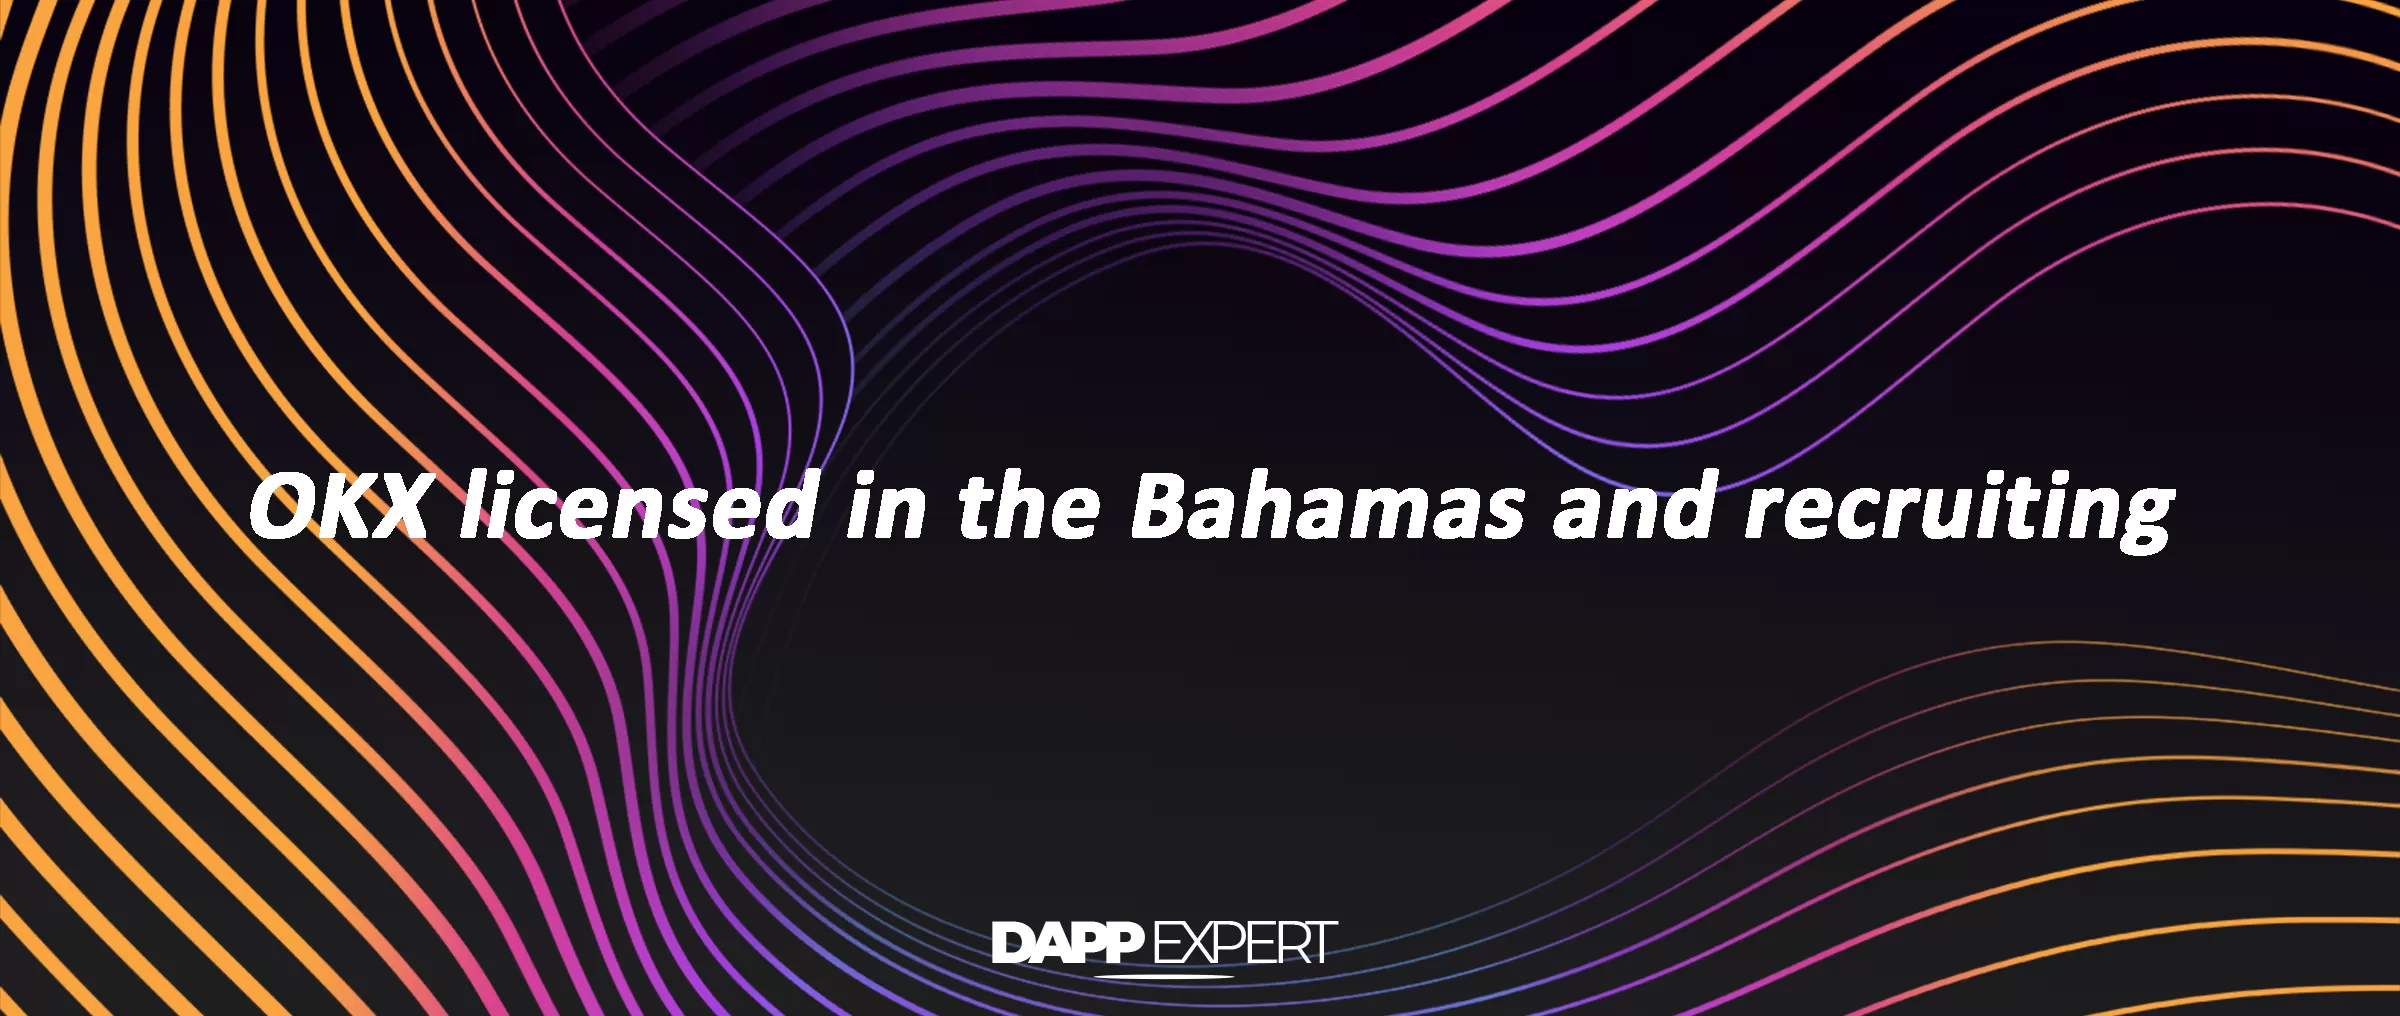 OKX licensed in the Bahamas and recruiting